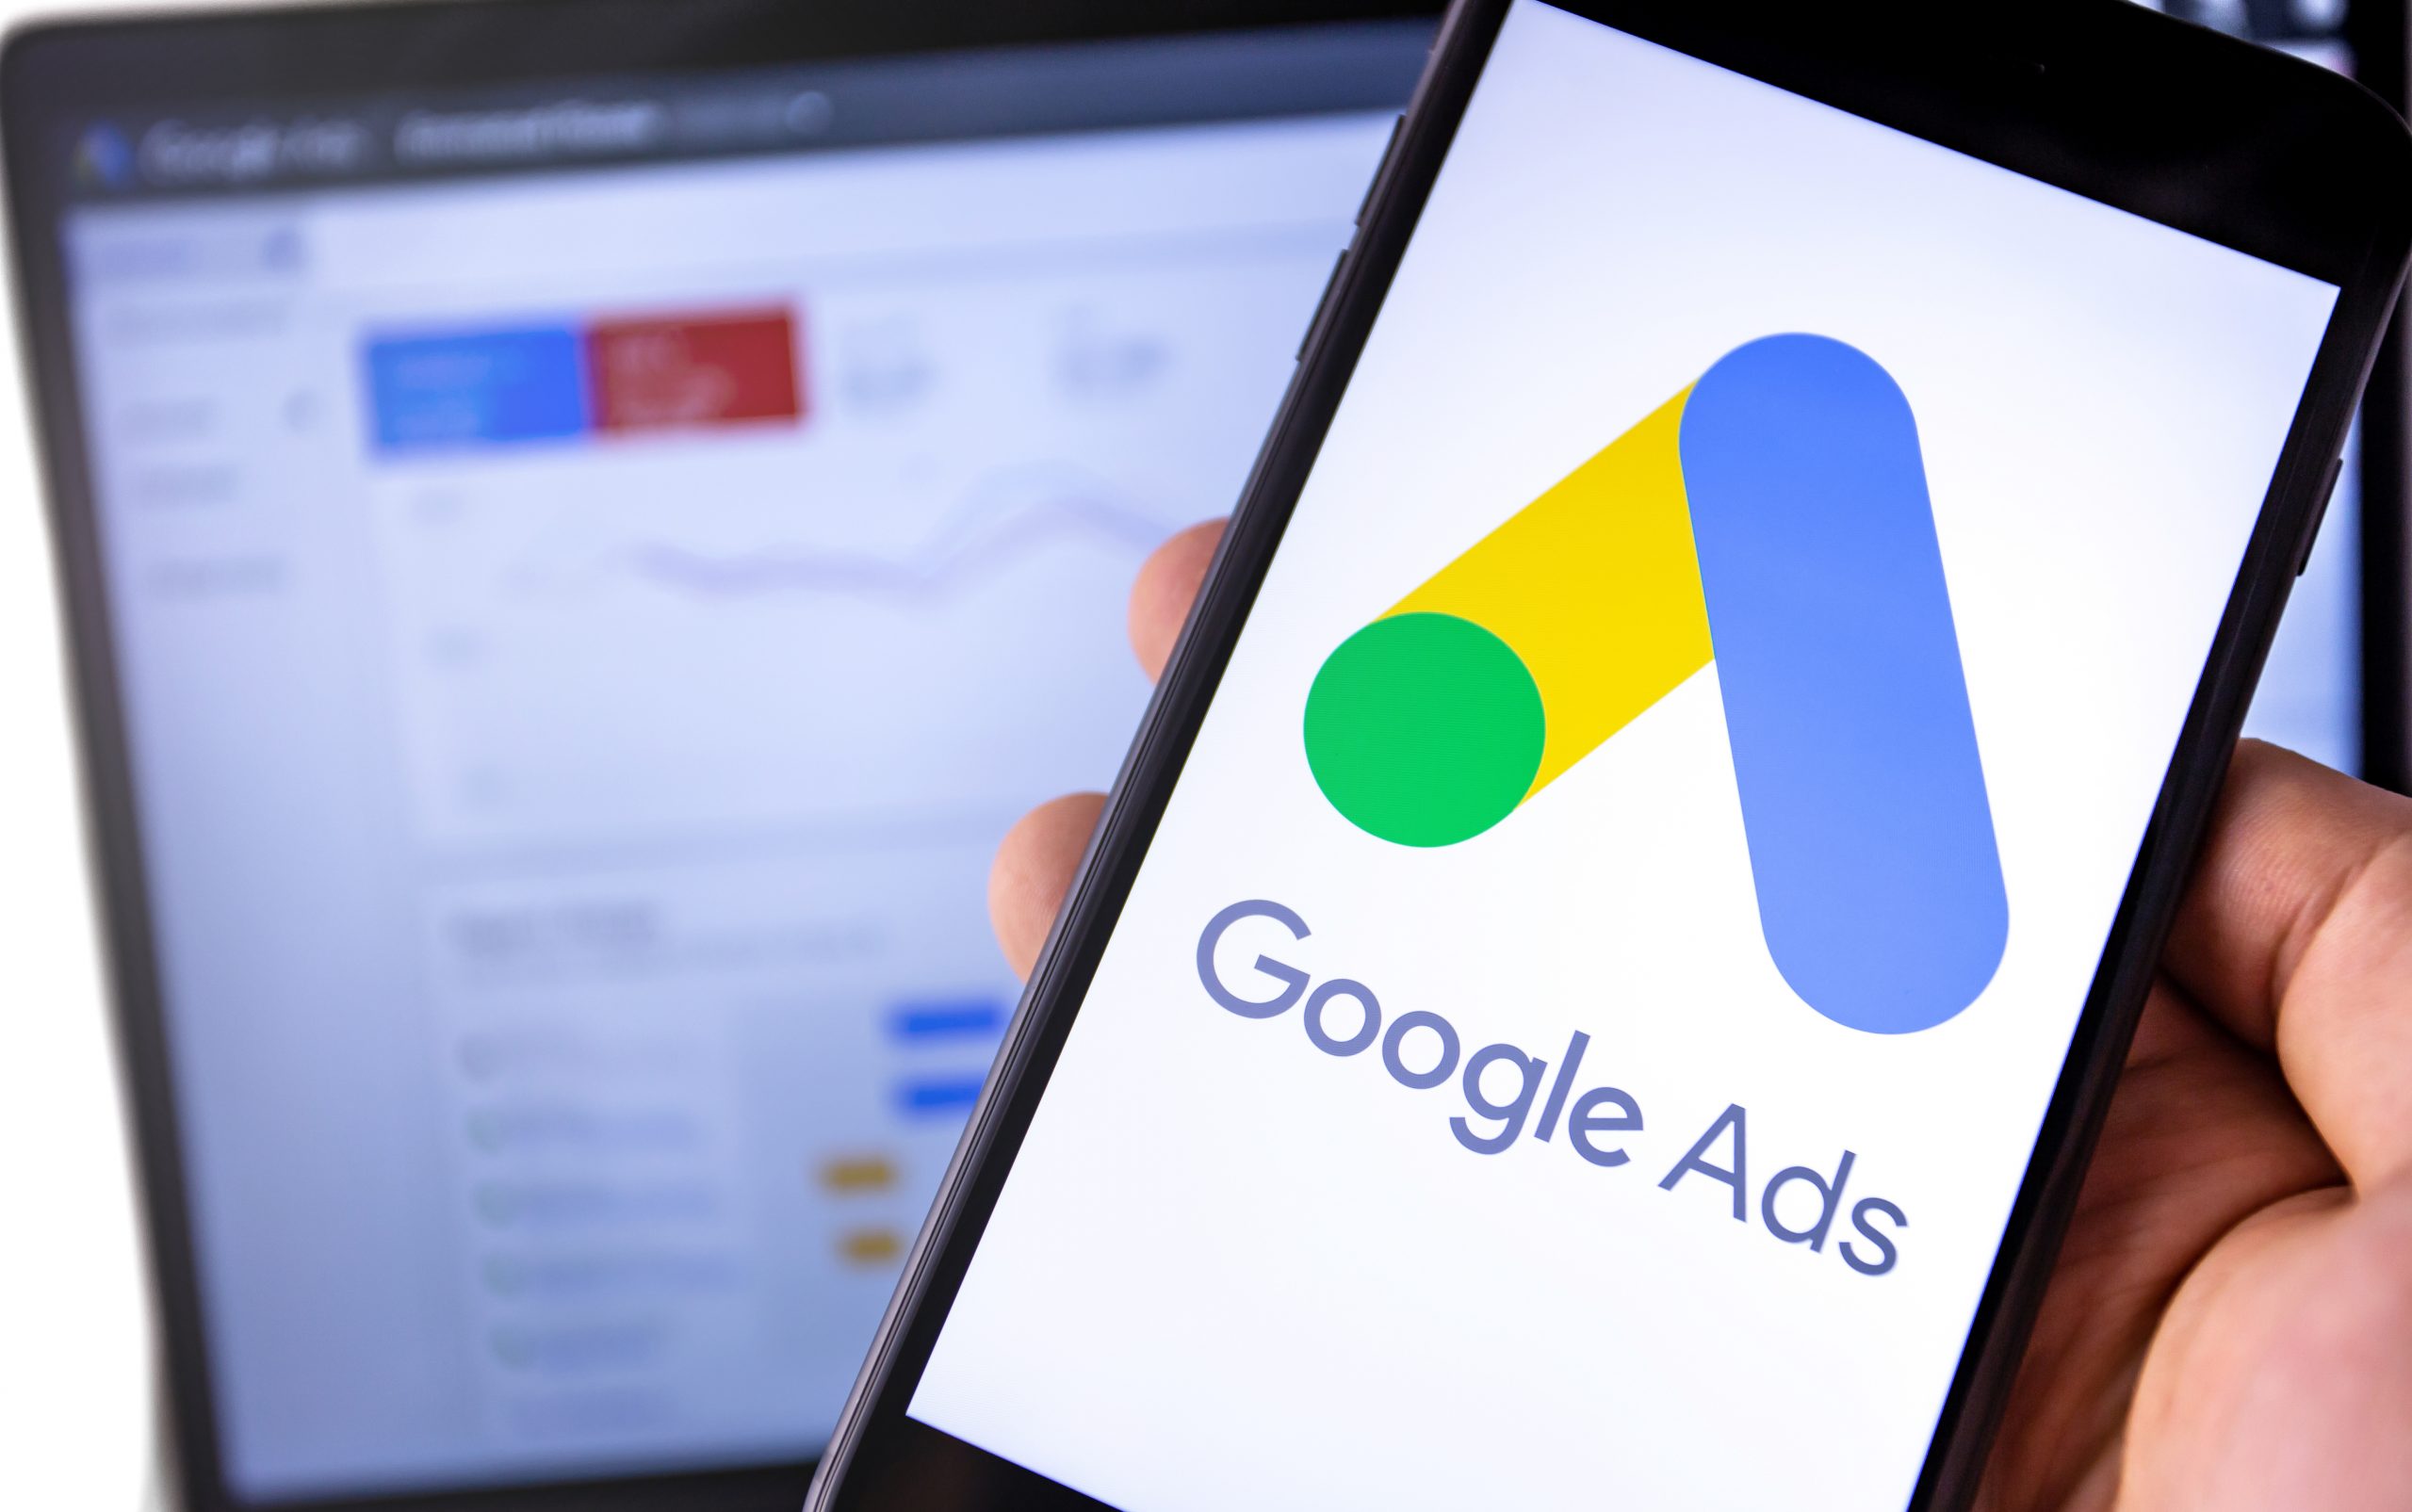 WHY SHOULD YOUR BUSINESS USE GOOGLE ADS?